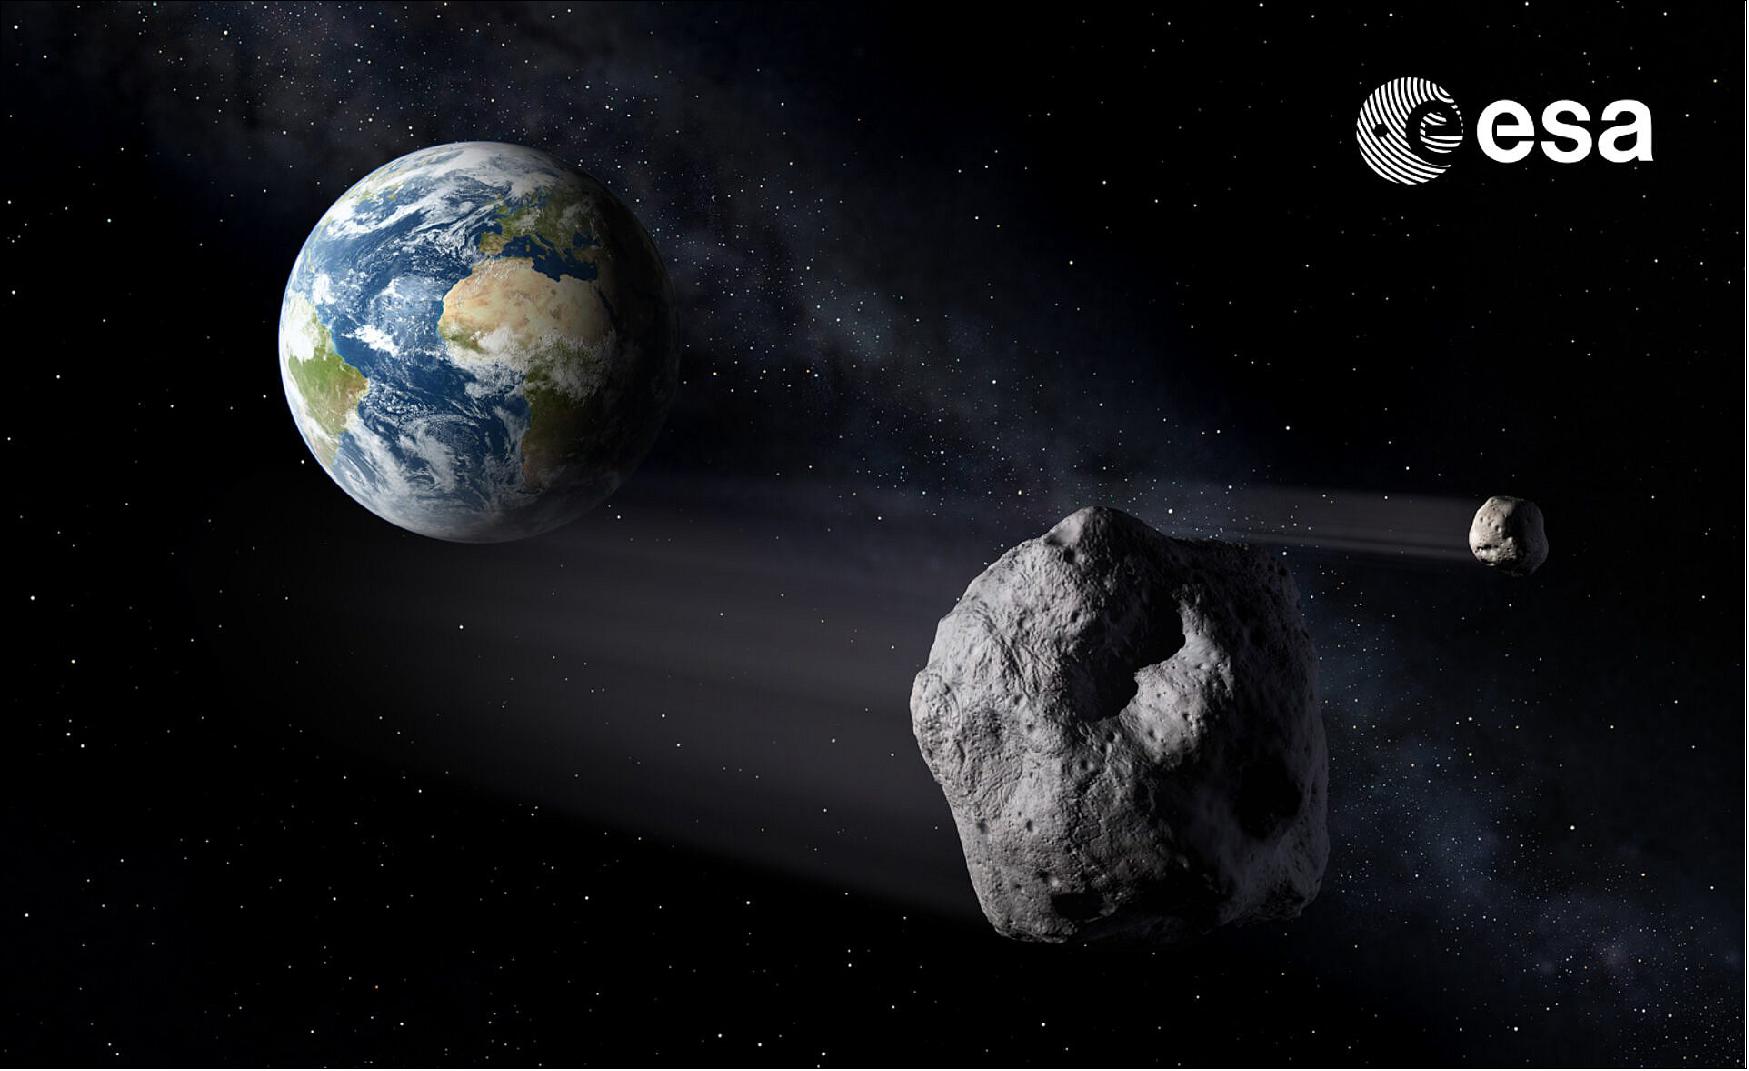 Figure 20: Asteroids passing Earth. The SSA-NEO system is based on syndicating and federating observation and tracking data provided by a large number of European and international sources (image credit: ESA, P. Carril)